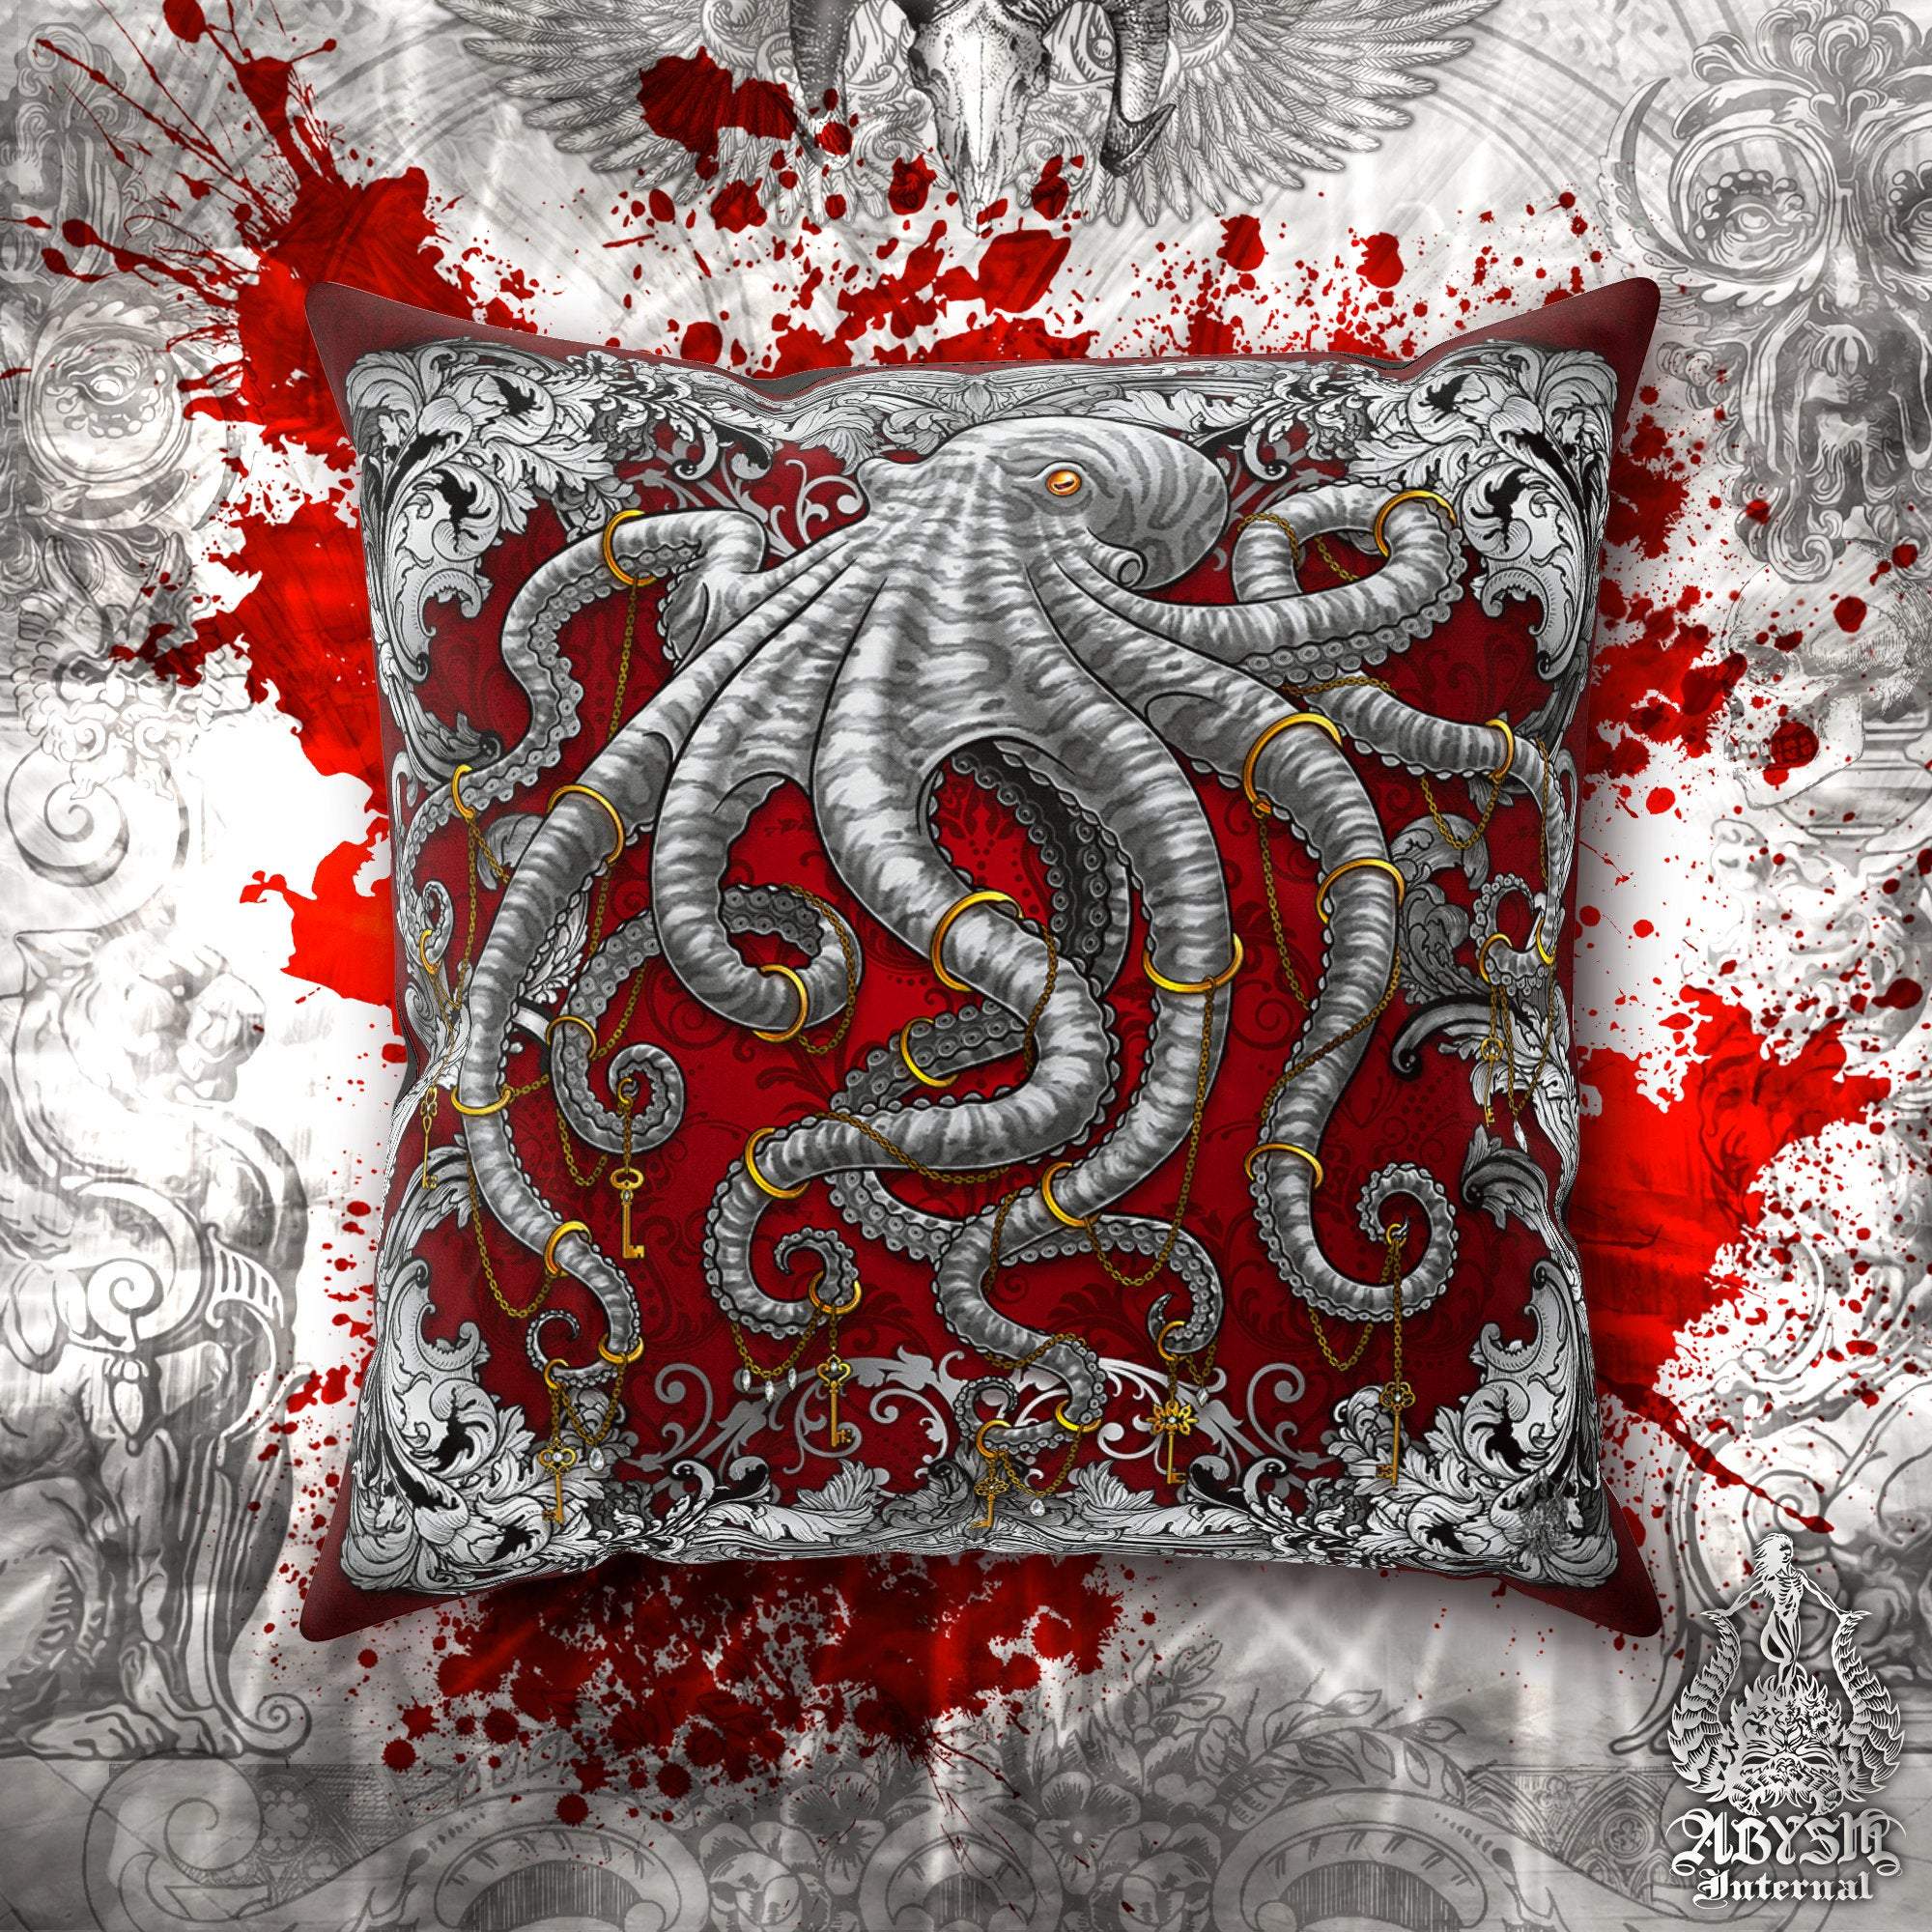 Octopus Throw Pillow, Decorative Accent Cushion, Coastal Home Decor, Indie and Eclectic Design, Alternative - Silver & Red - Abysm Internal